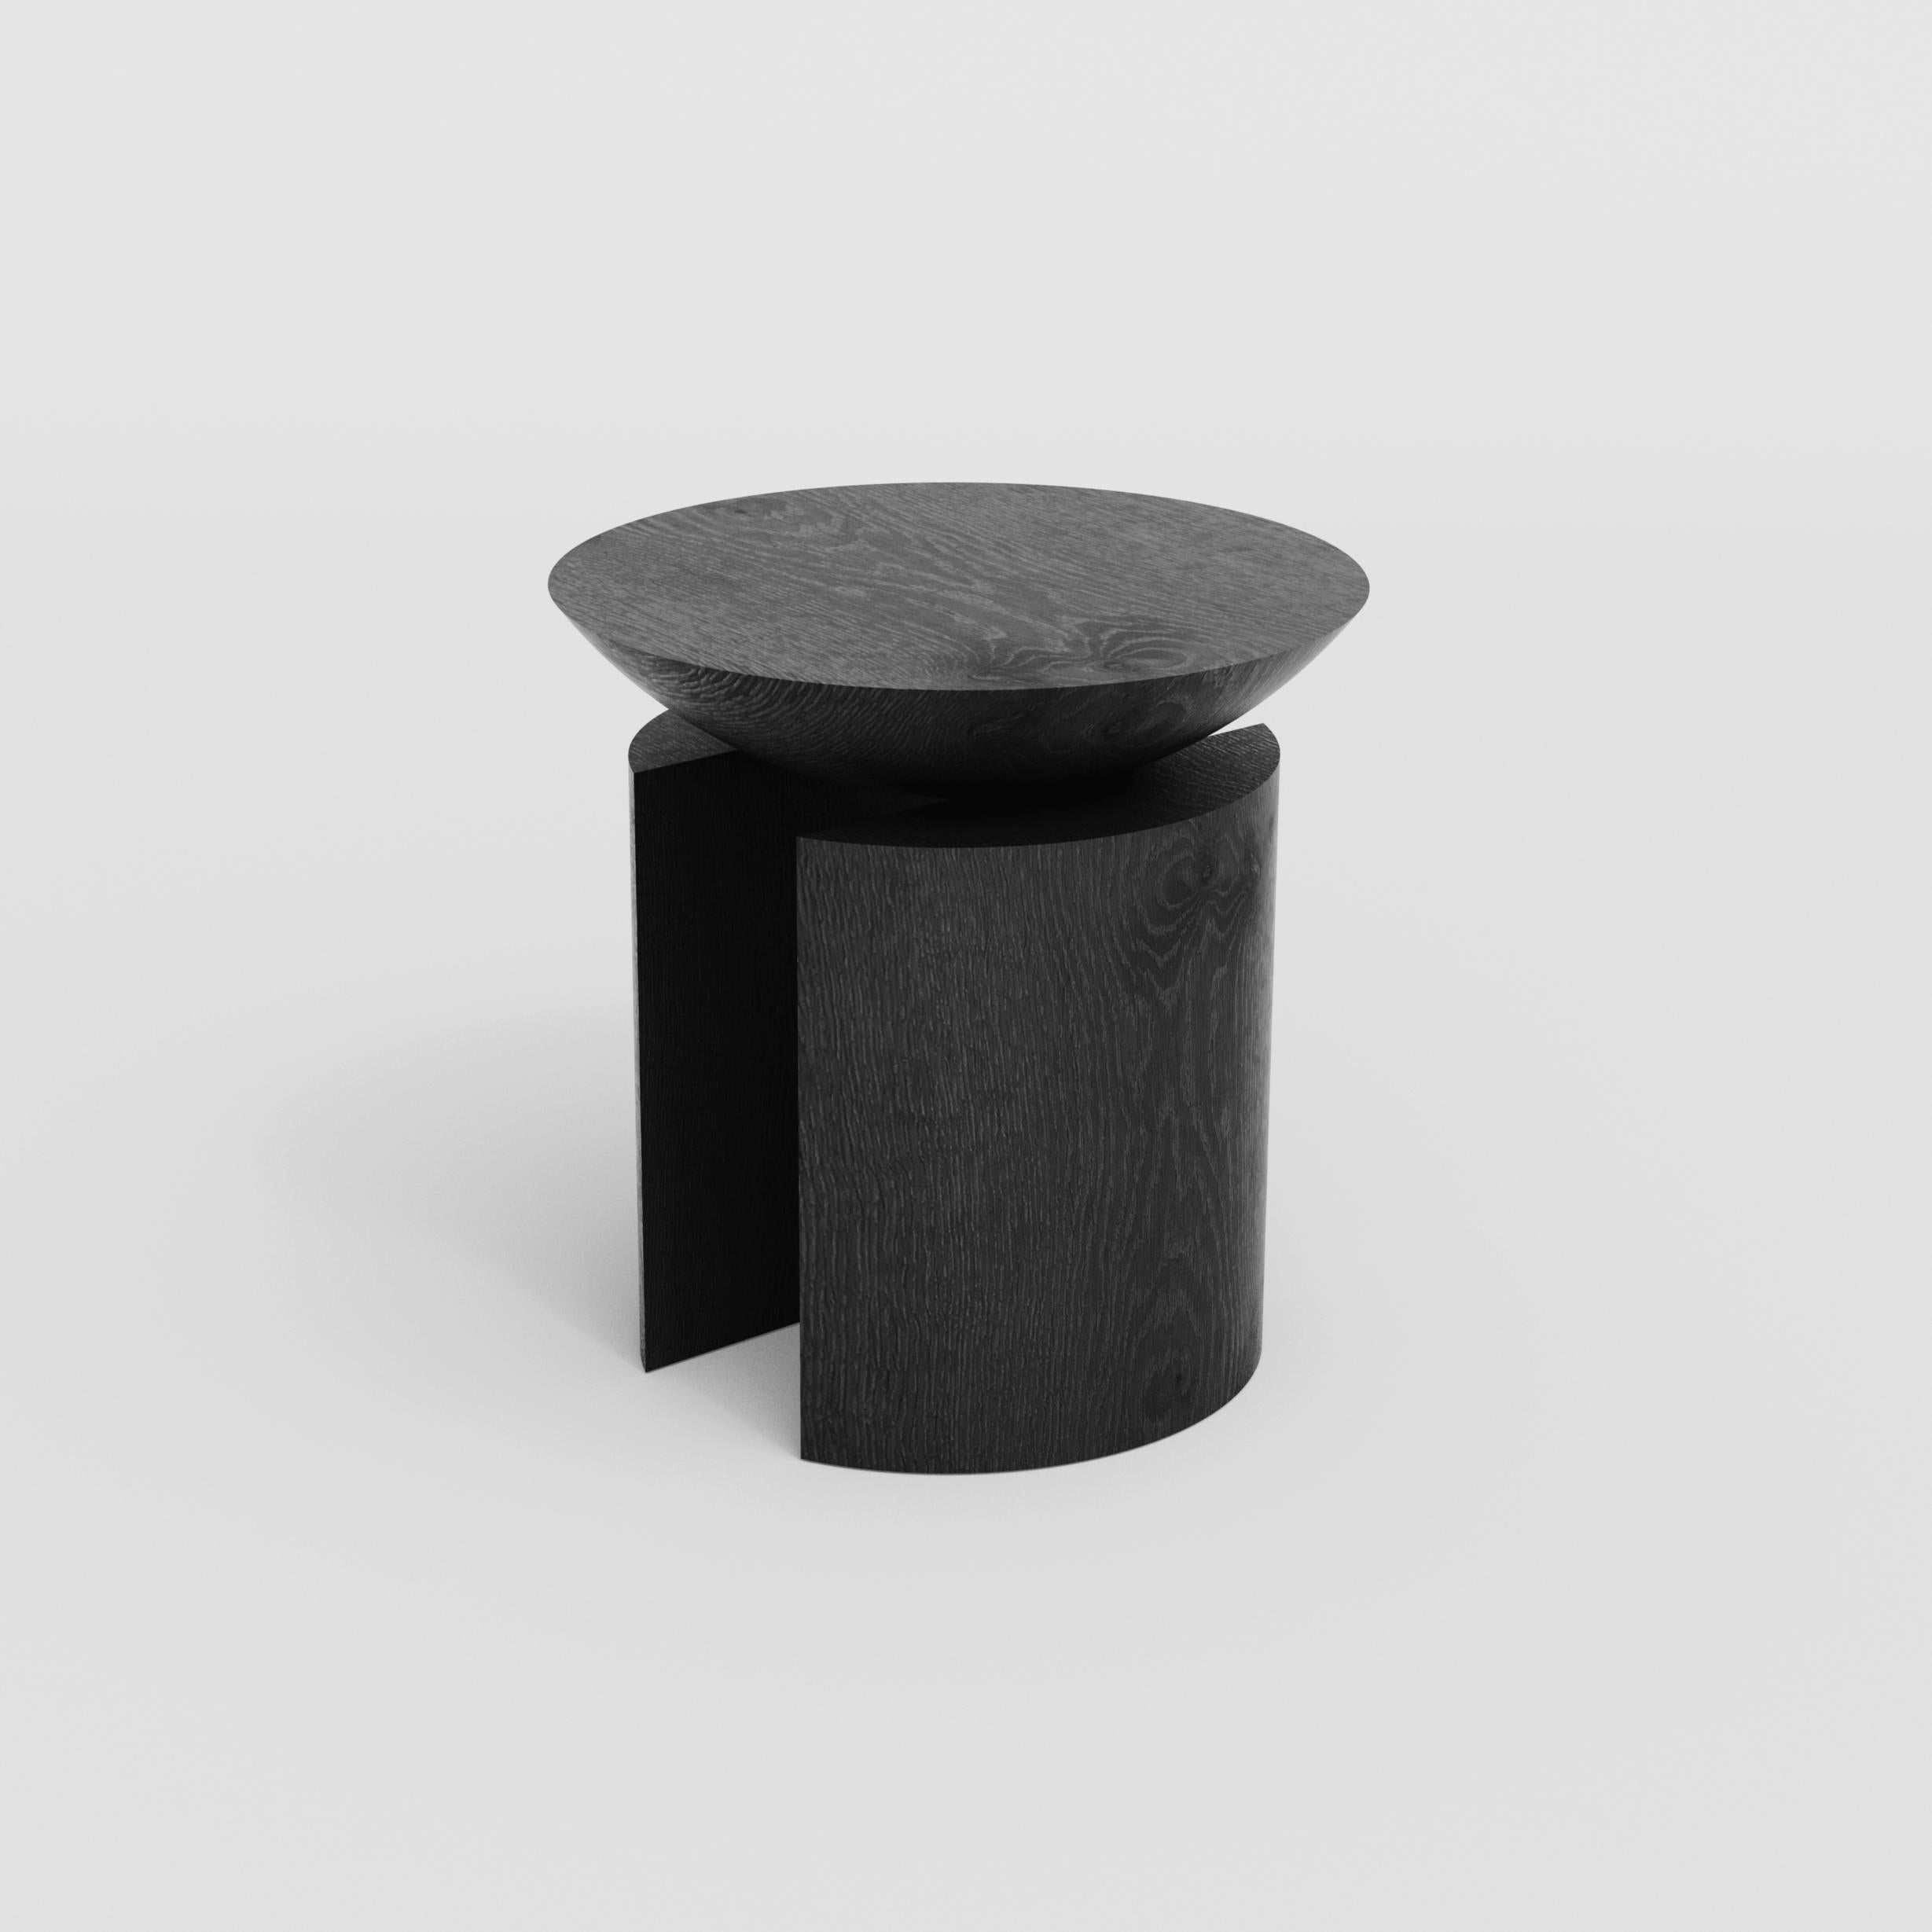 Brazilian Anca Sculptural Side Table or Stool in Tropical Hardwood by Pedro Paulo Venzon